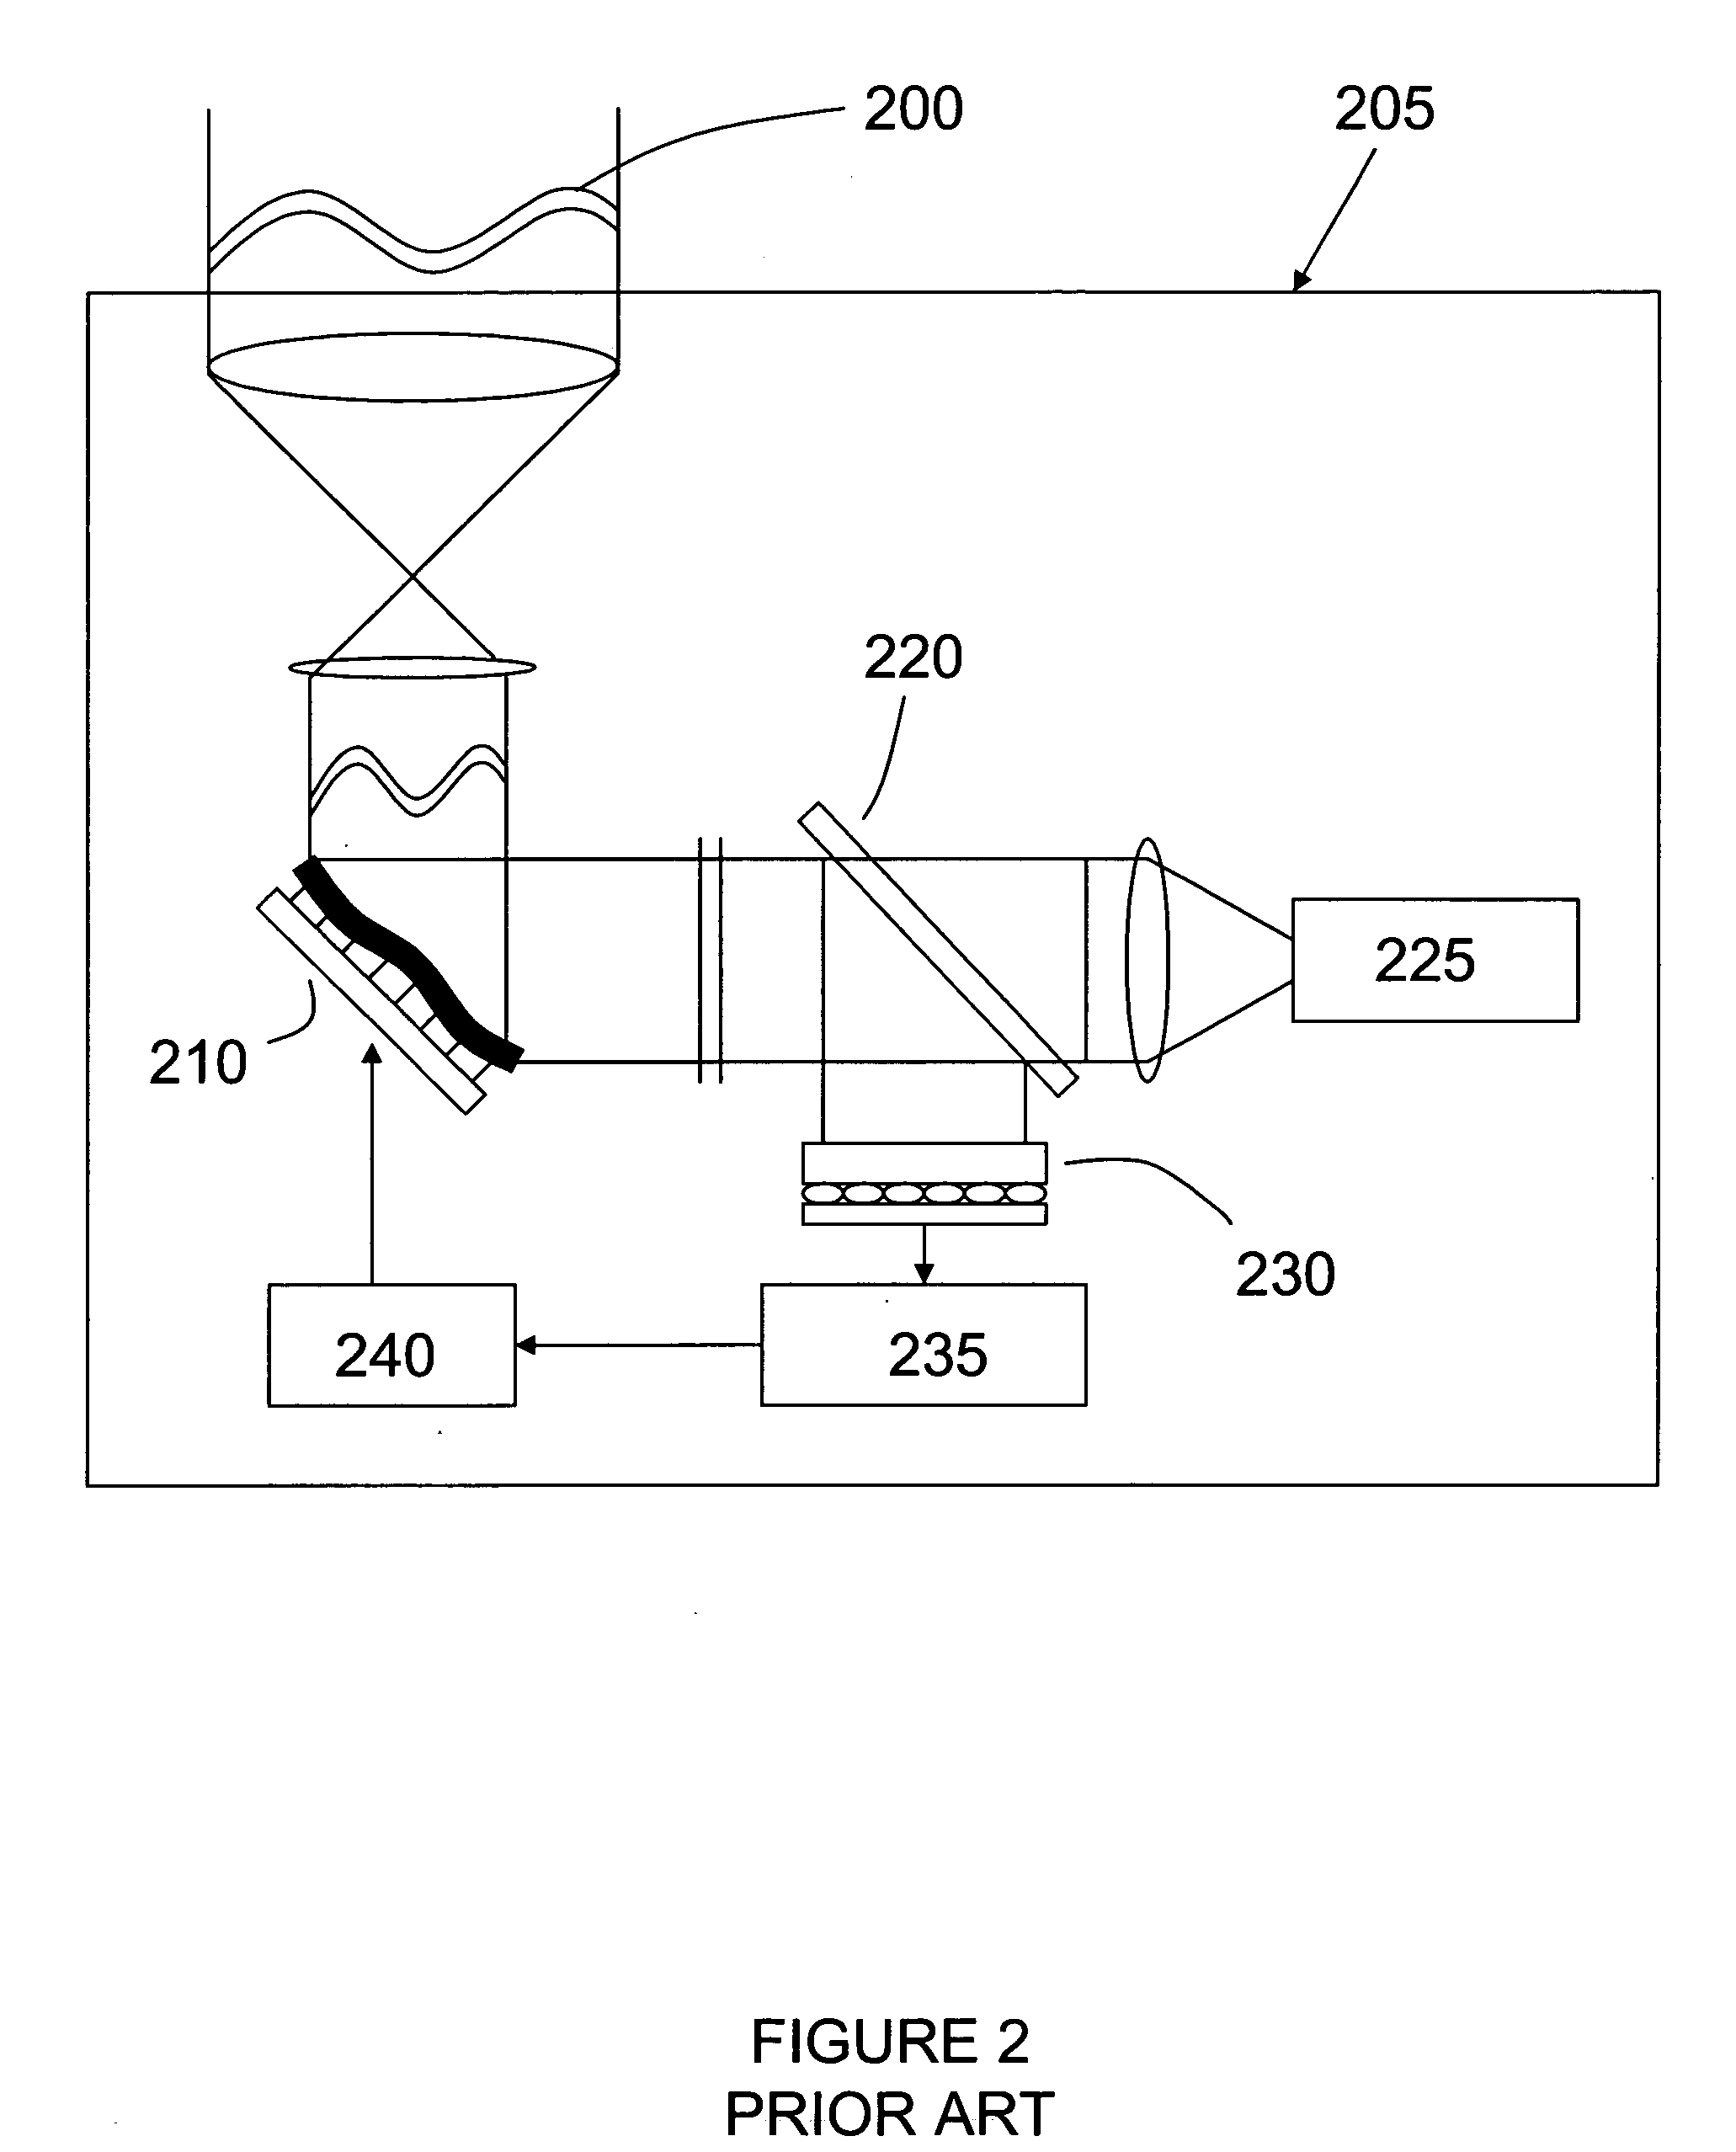 Actuator apparatus and method for improved deflection characteristics